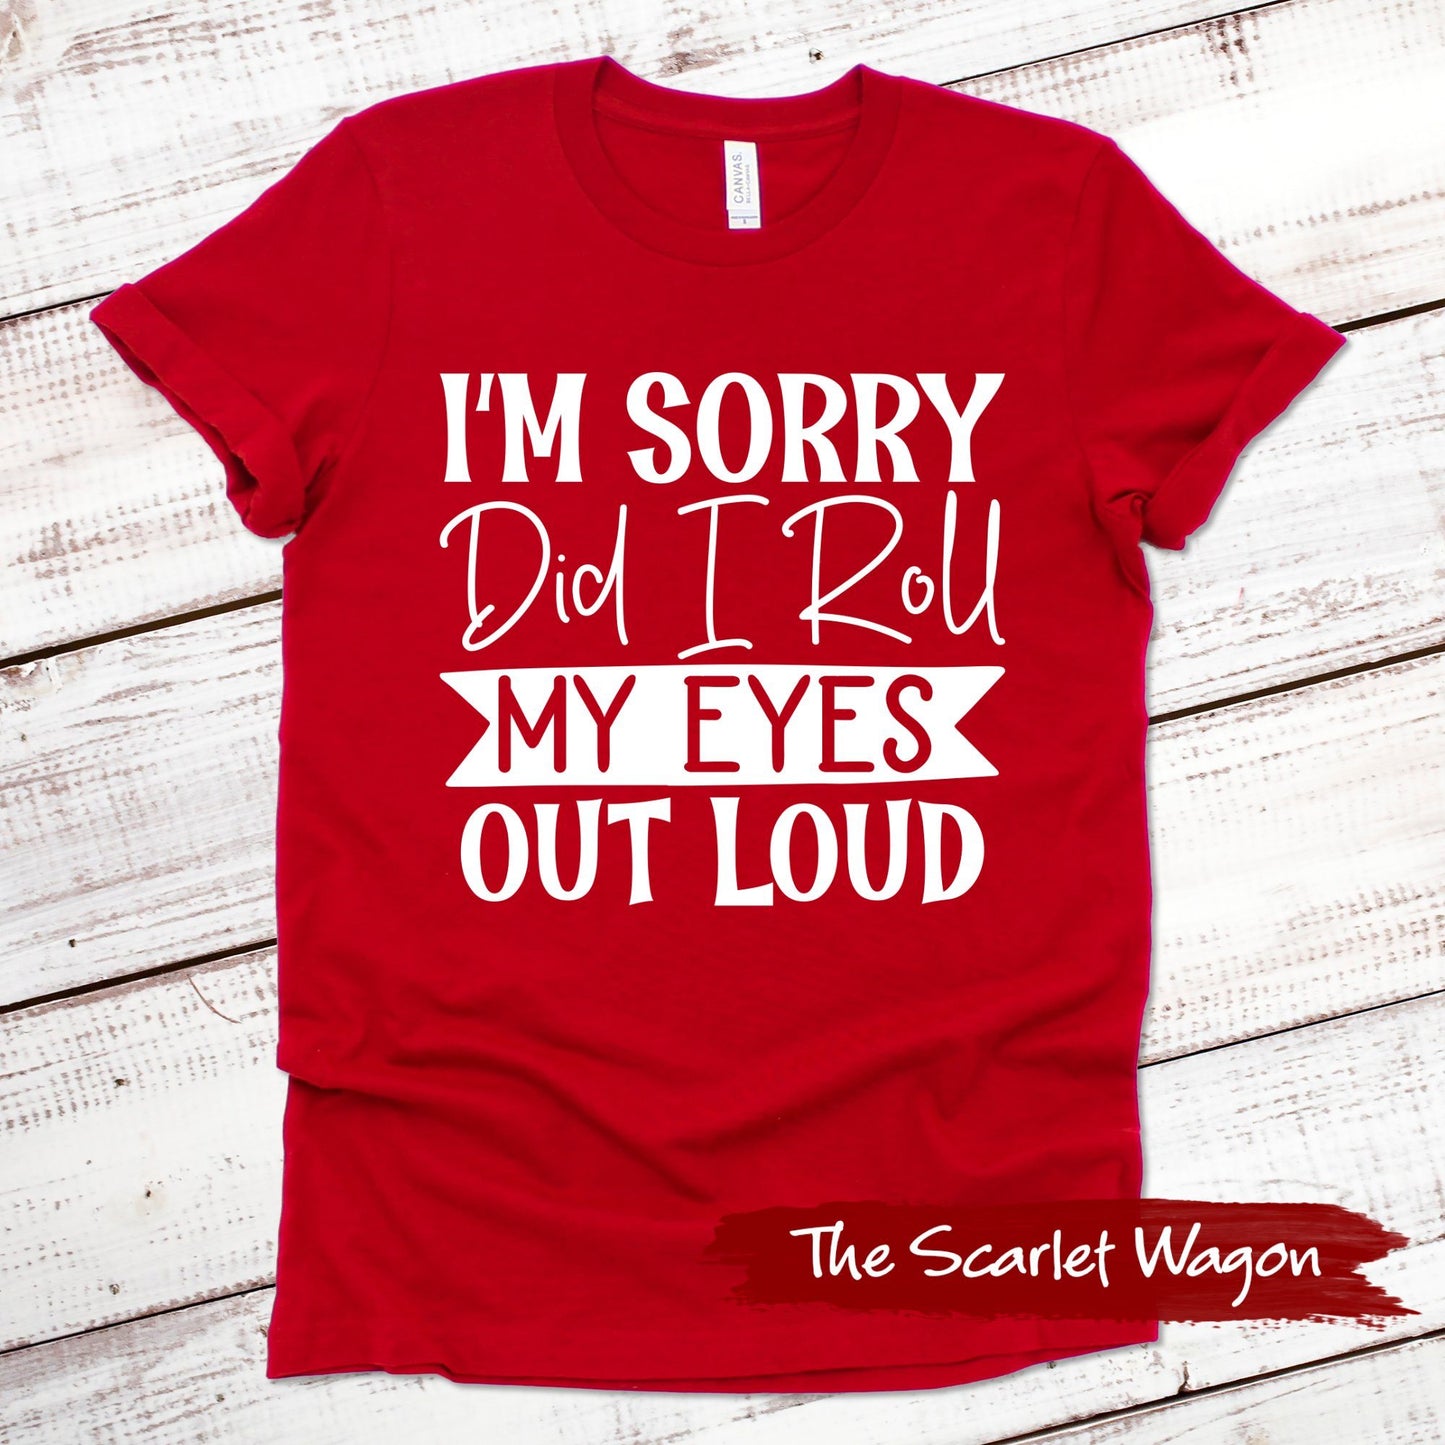 I'm Sorry Did I Roll My Eyes Out Loud Funny Shirt Scarlet Wagon Red XS 